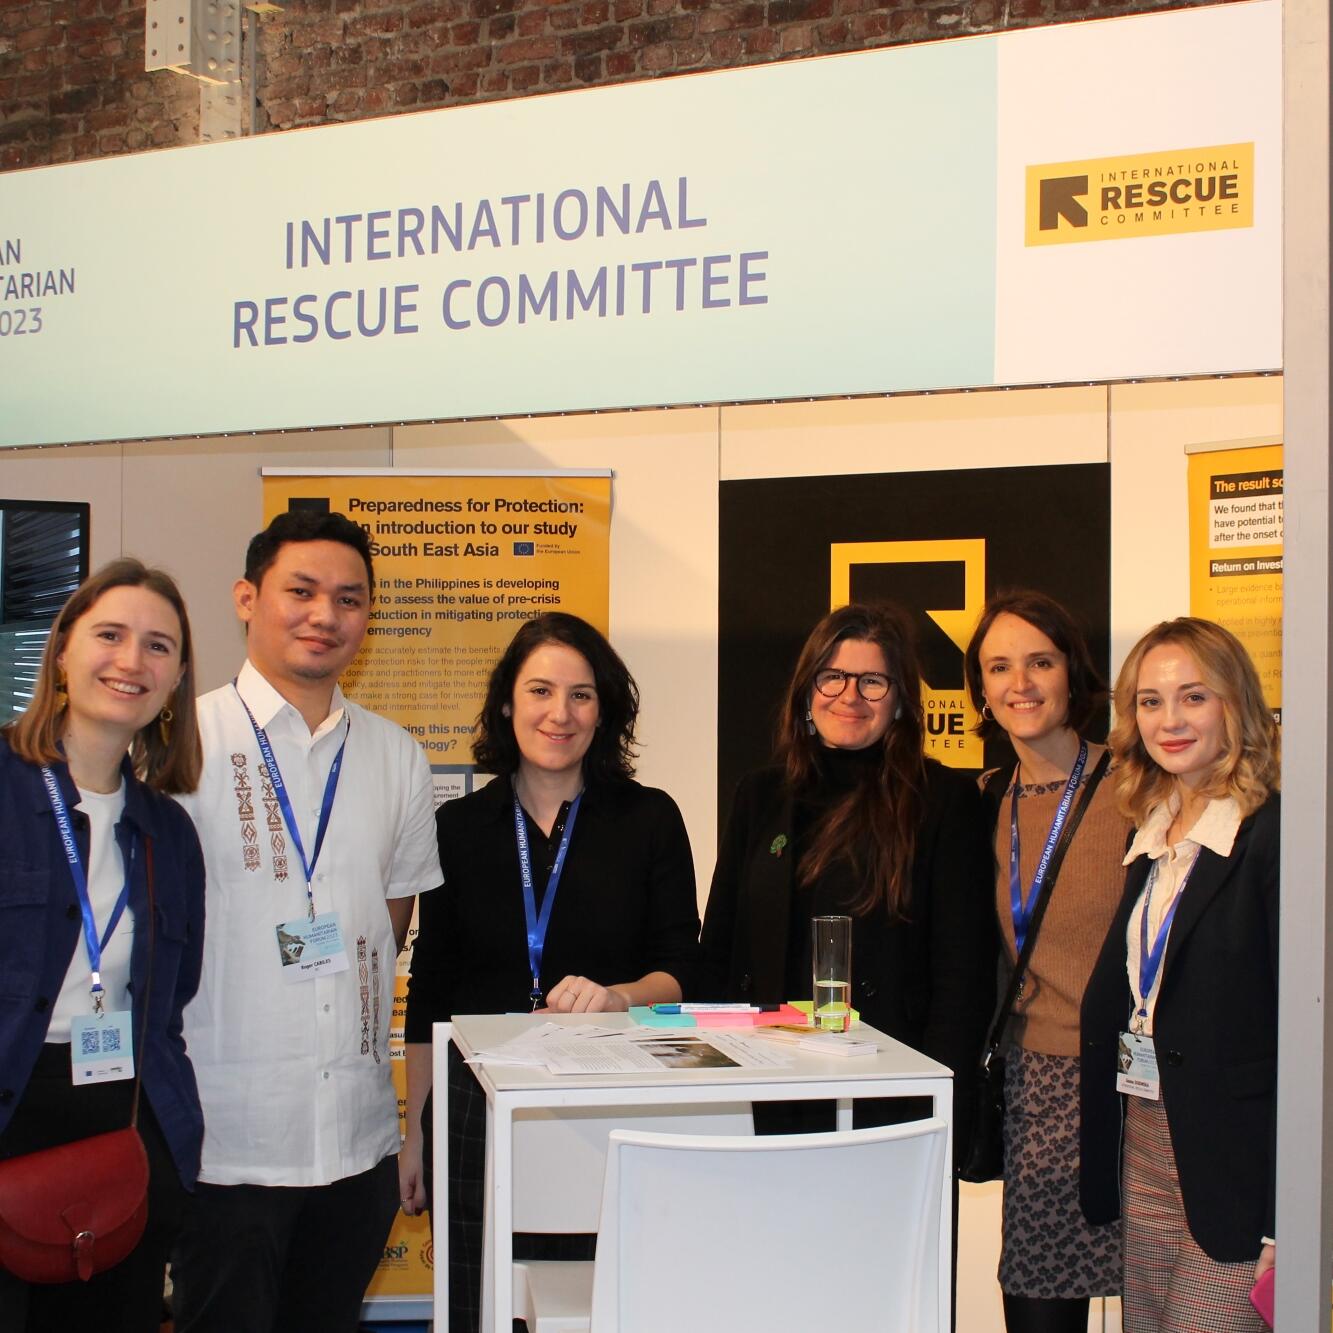 Staff from the IRC EU office